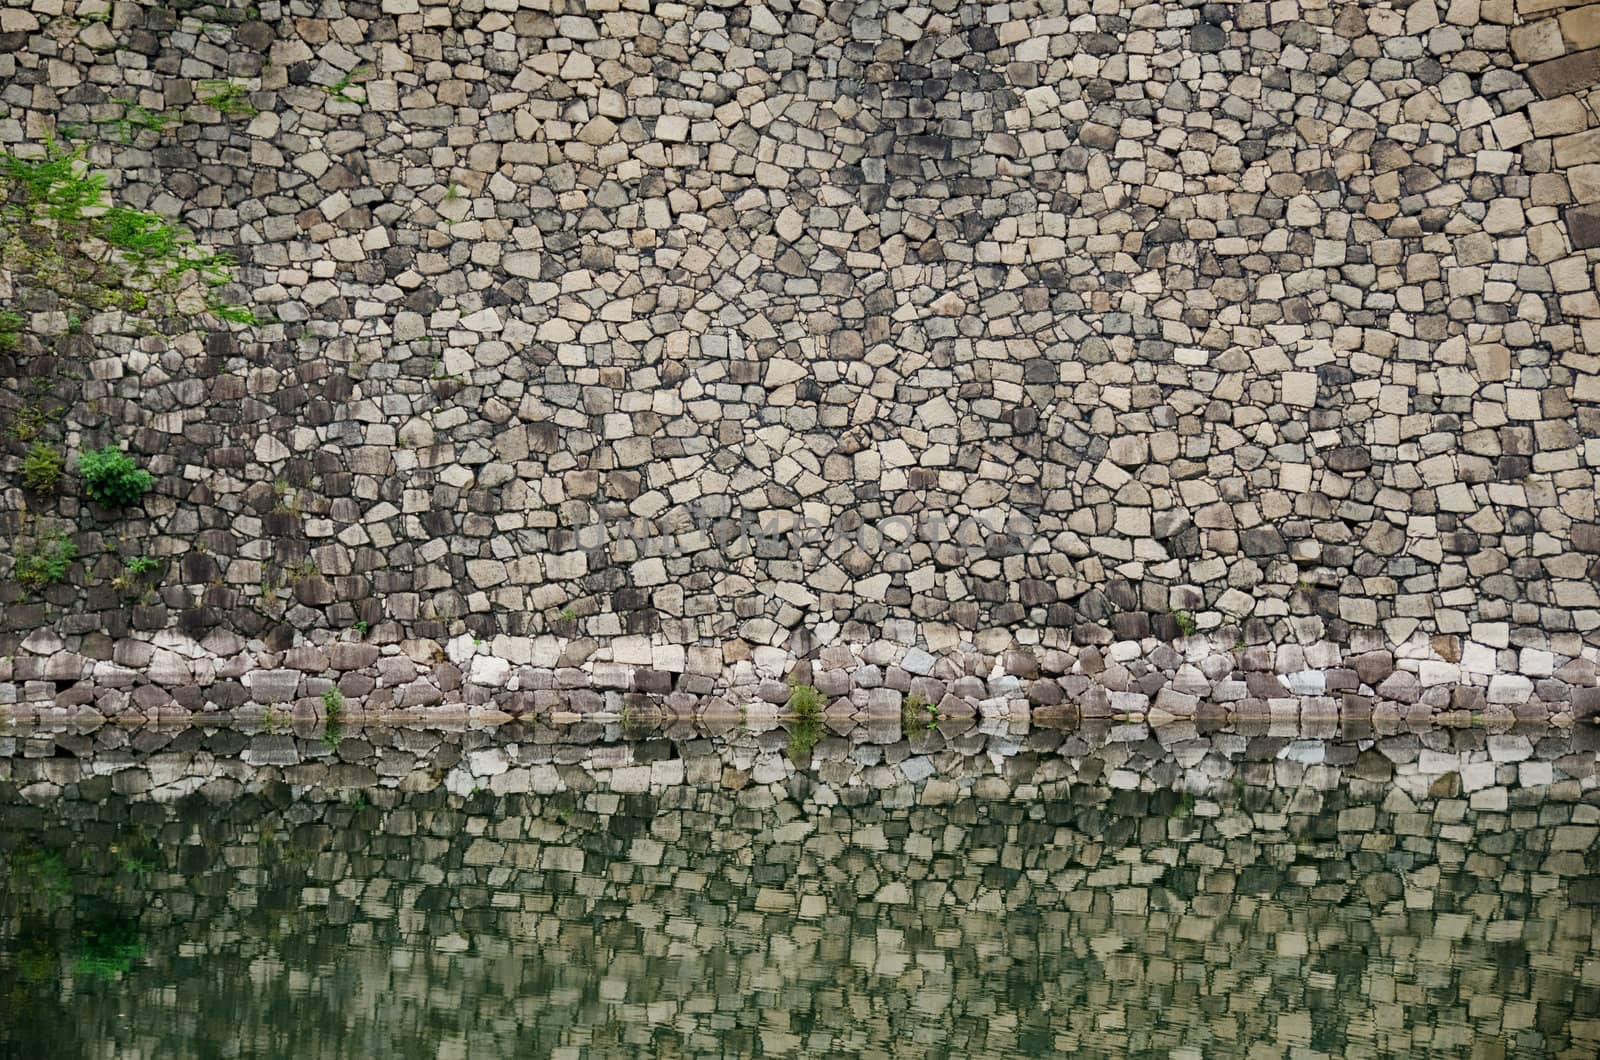 Strong castle fortification wall mirrored in water